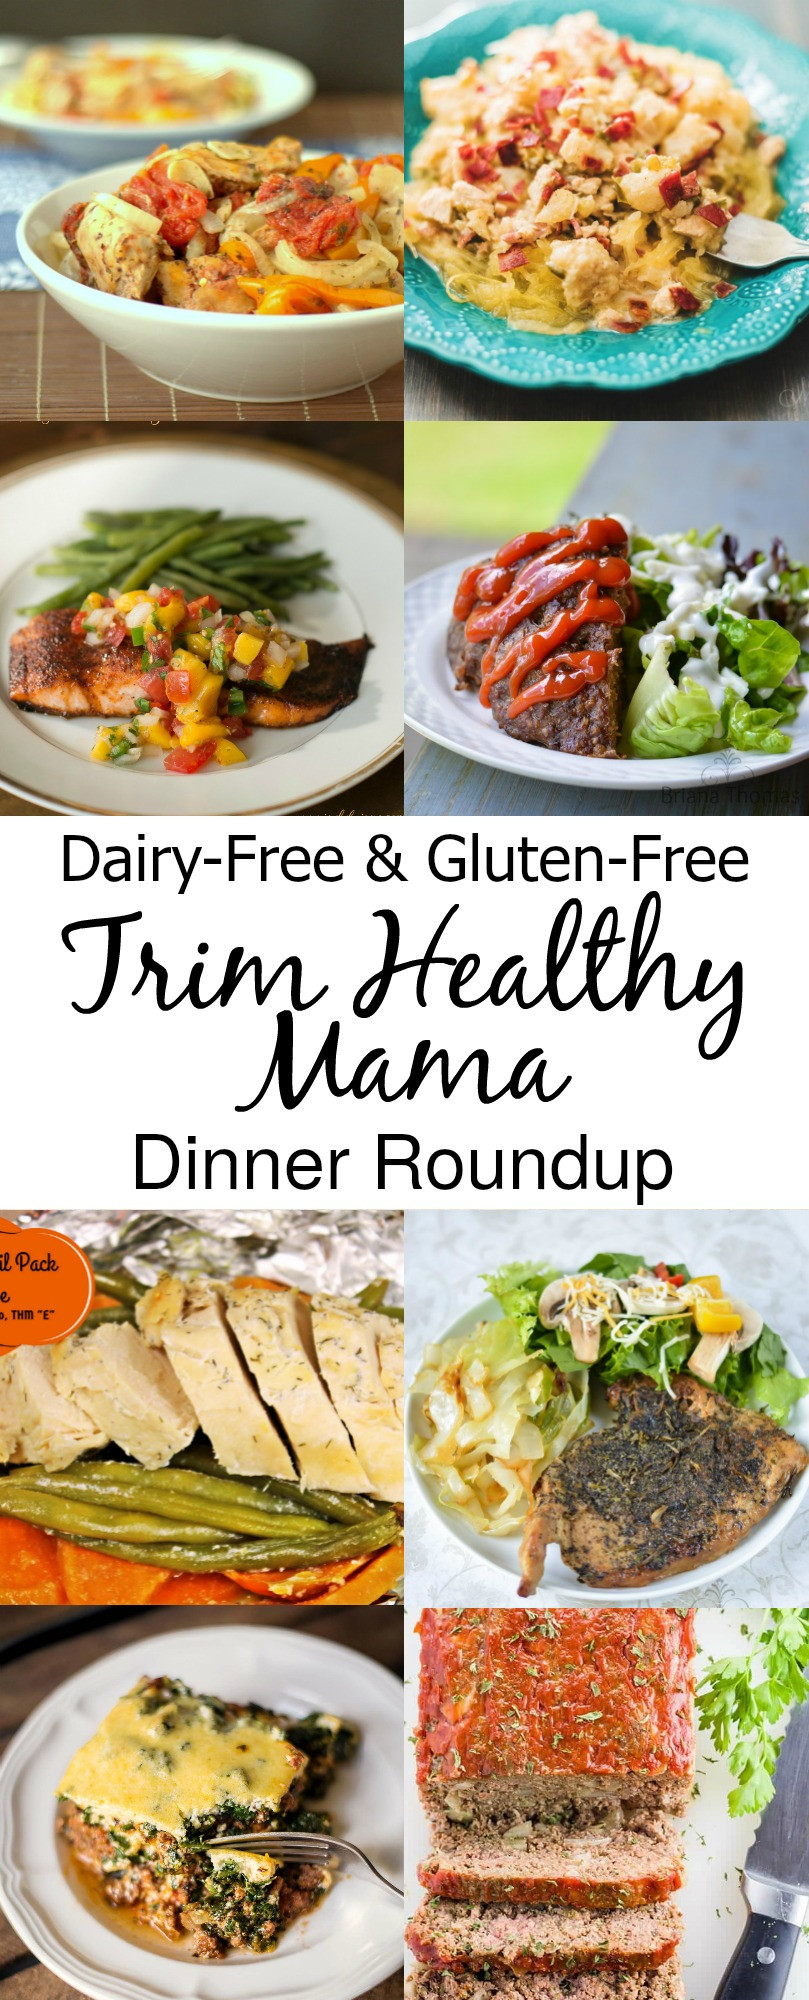 Dairy Free Dinners
 Dairy Free and Gluten Free Trim Healthy Mama Dinners